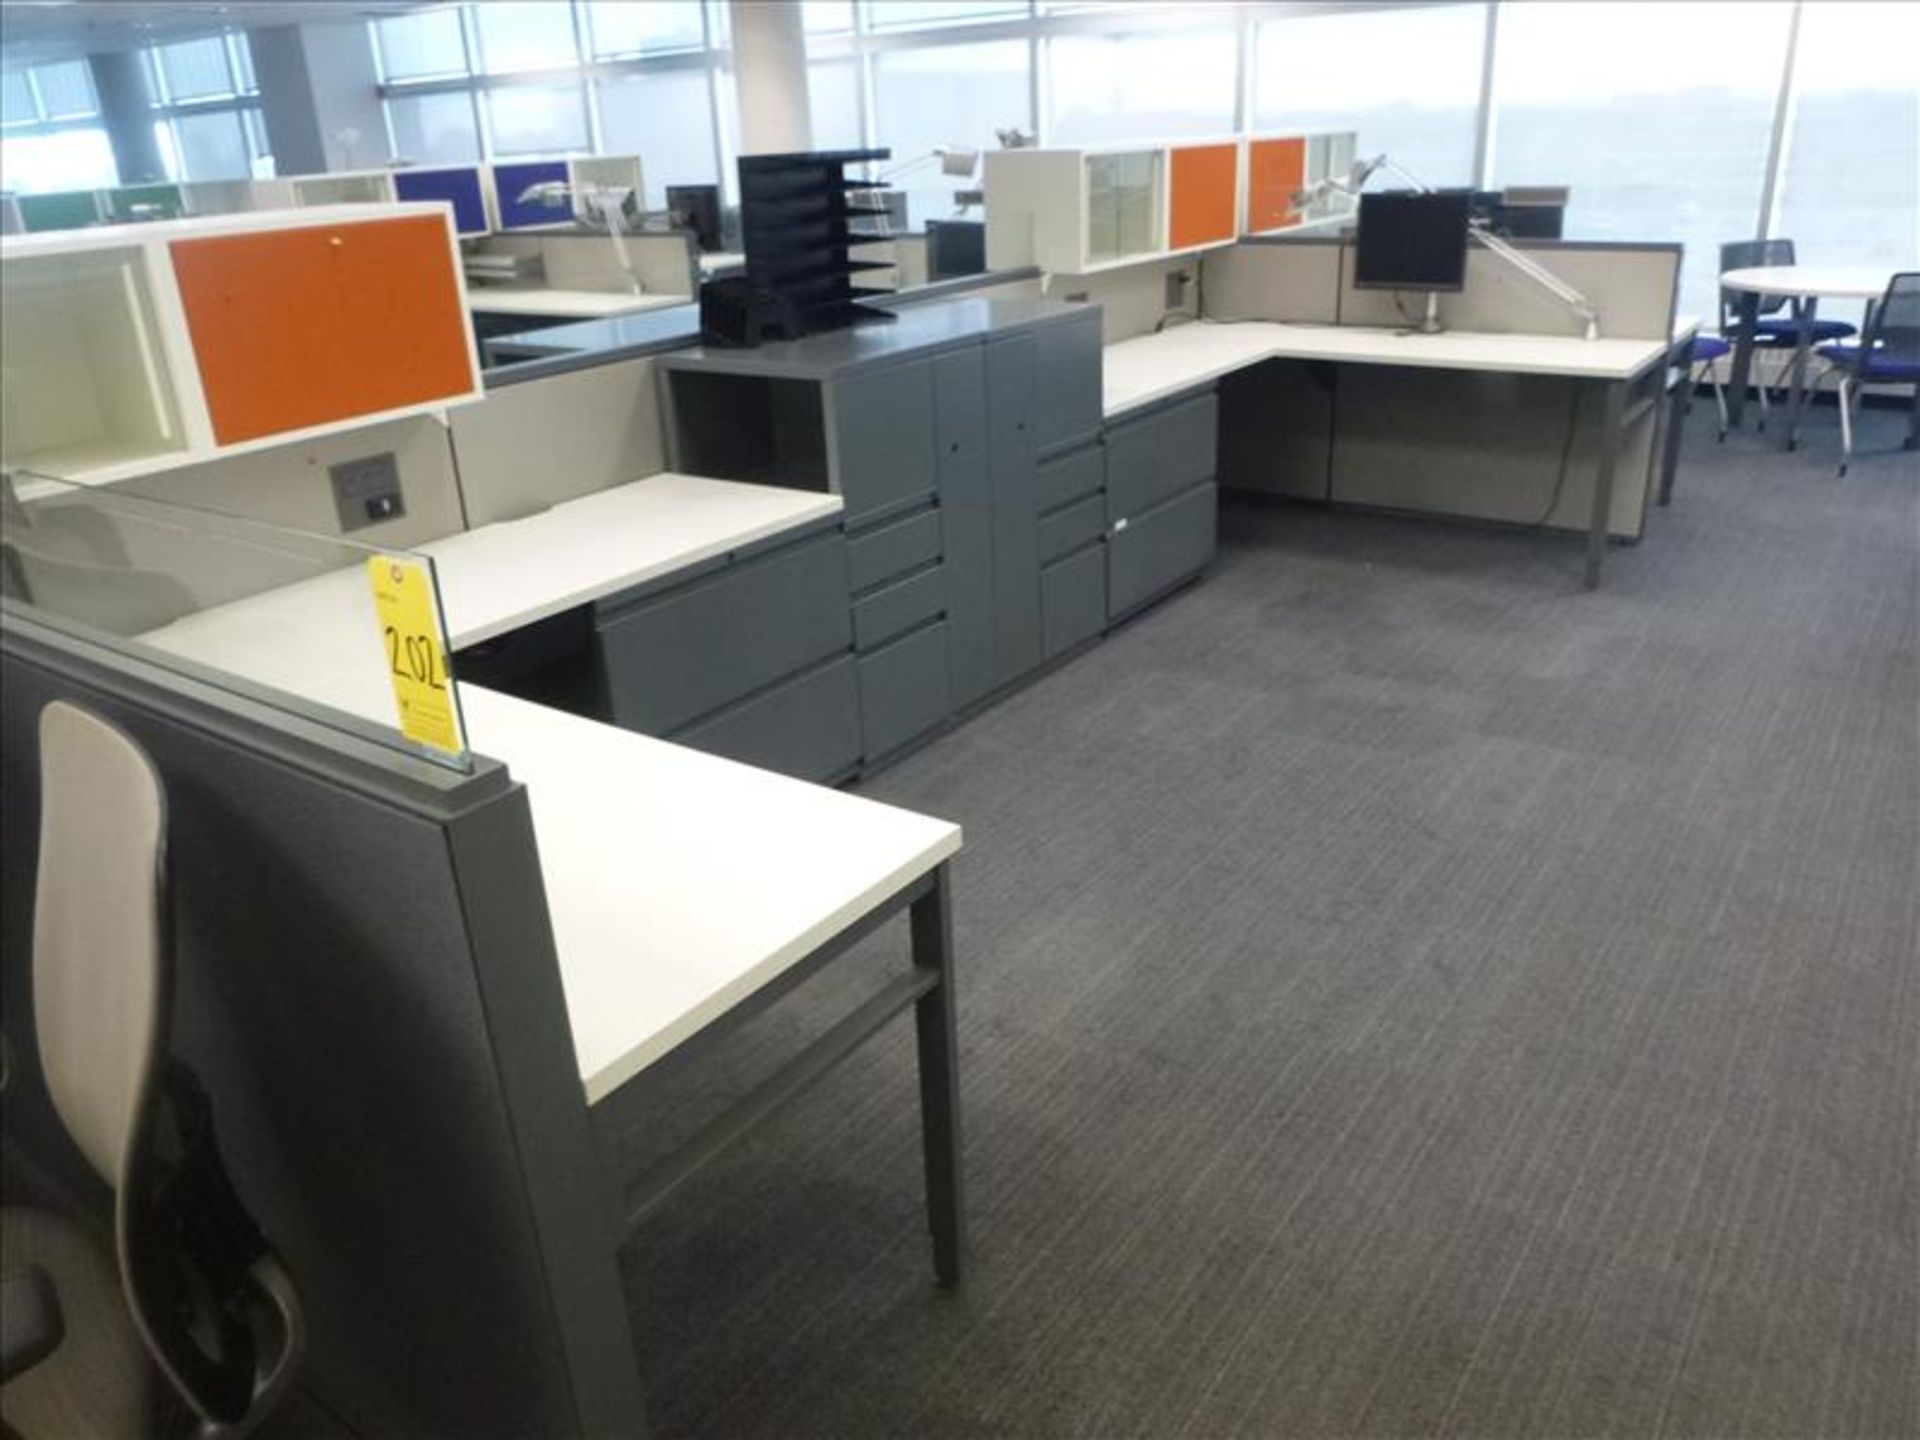 (6) Haworth cubicle workstations, approx. 12' x 25' footprint (excl. contents and office